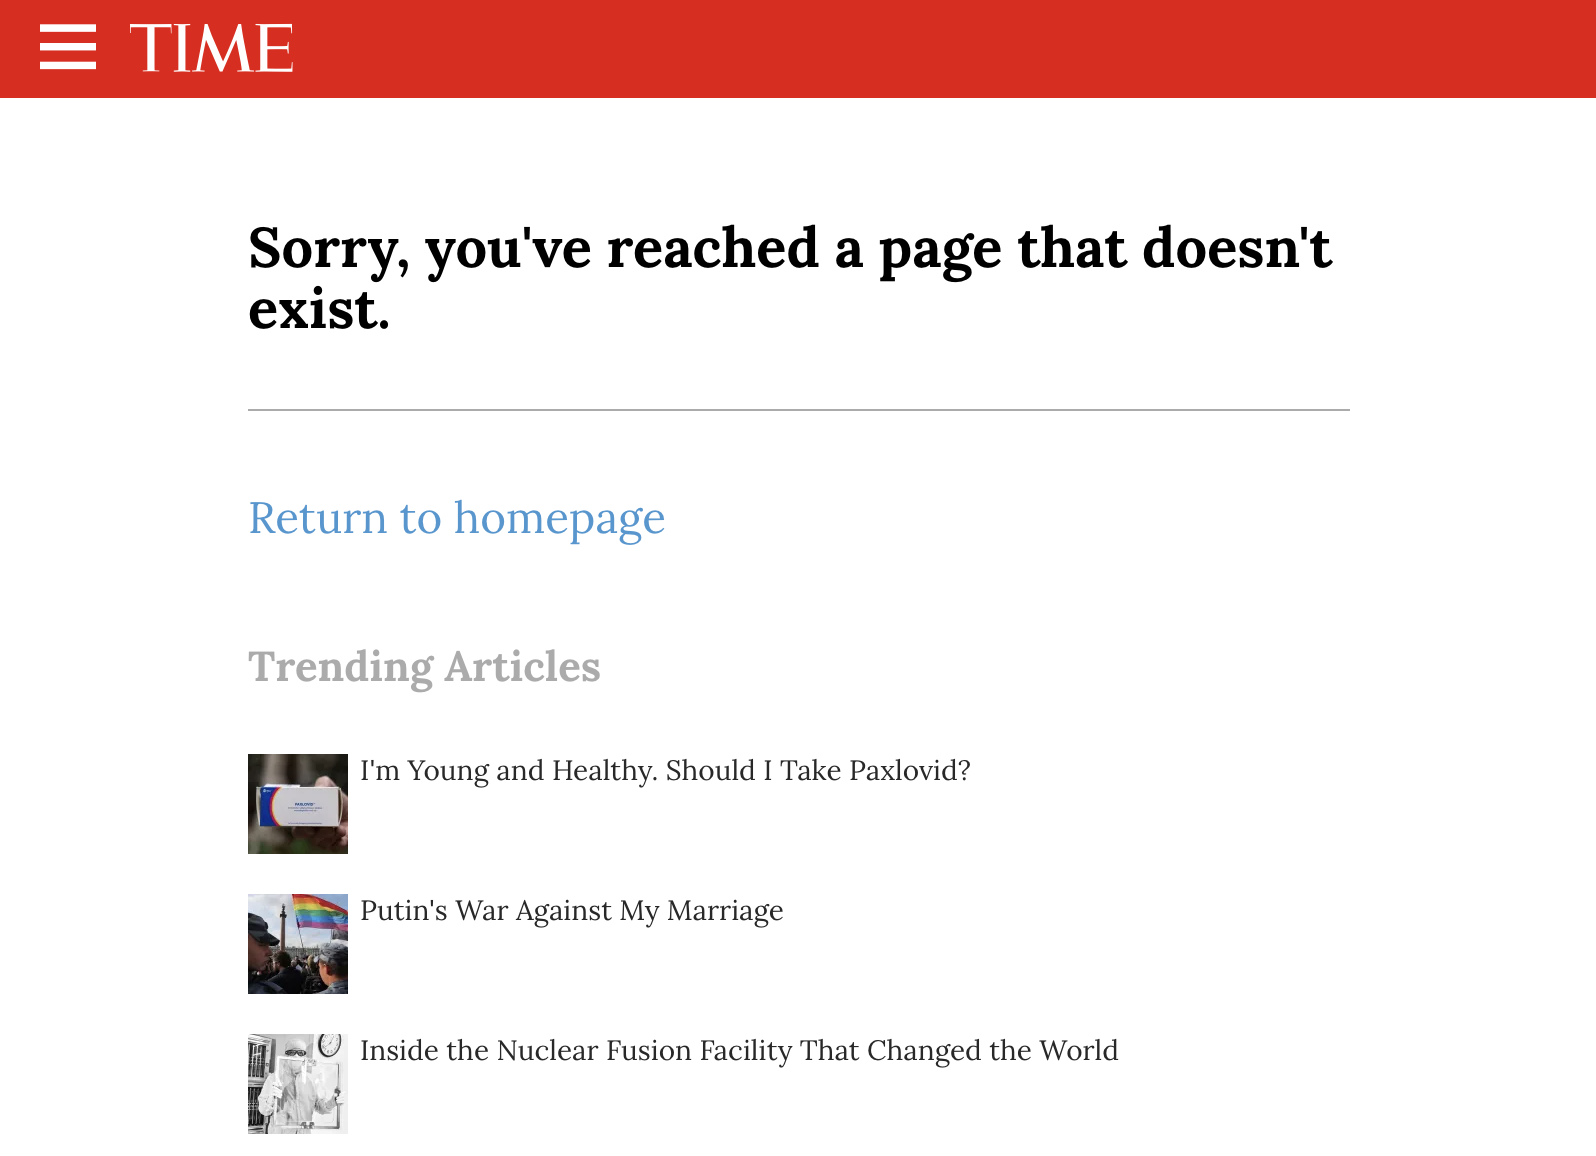 "Sorry, you've reached a page that doesn't exist." message on TIME Magazine